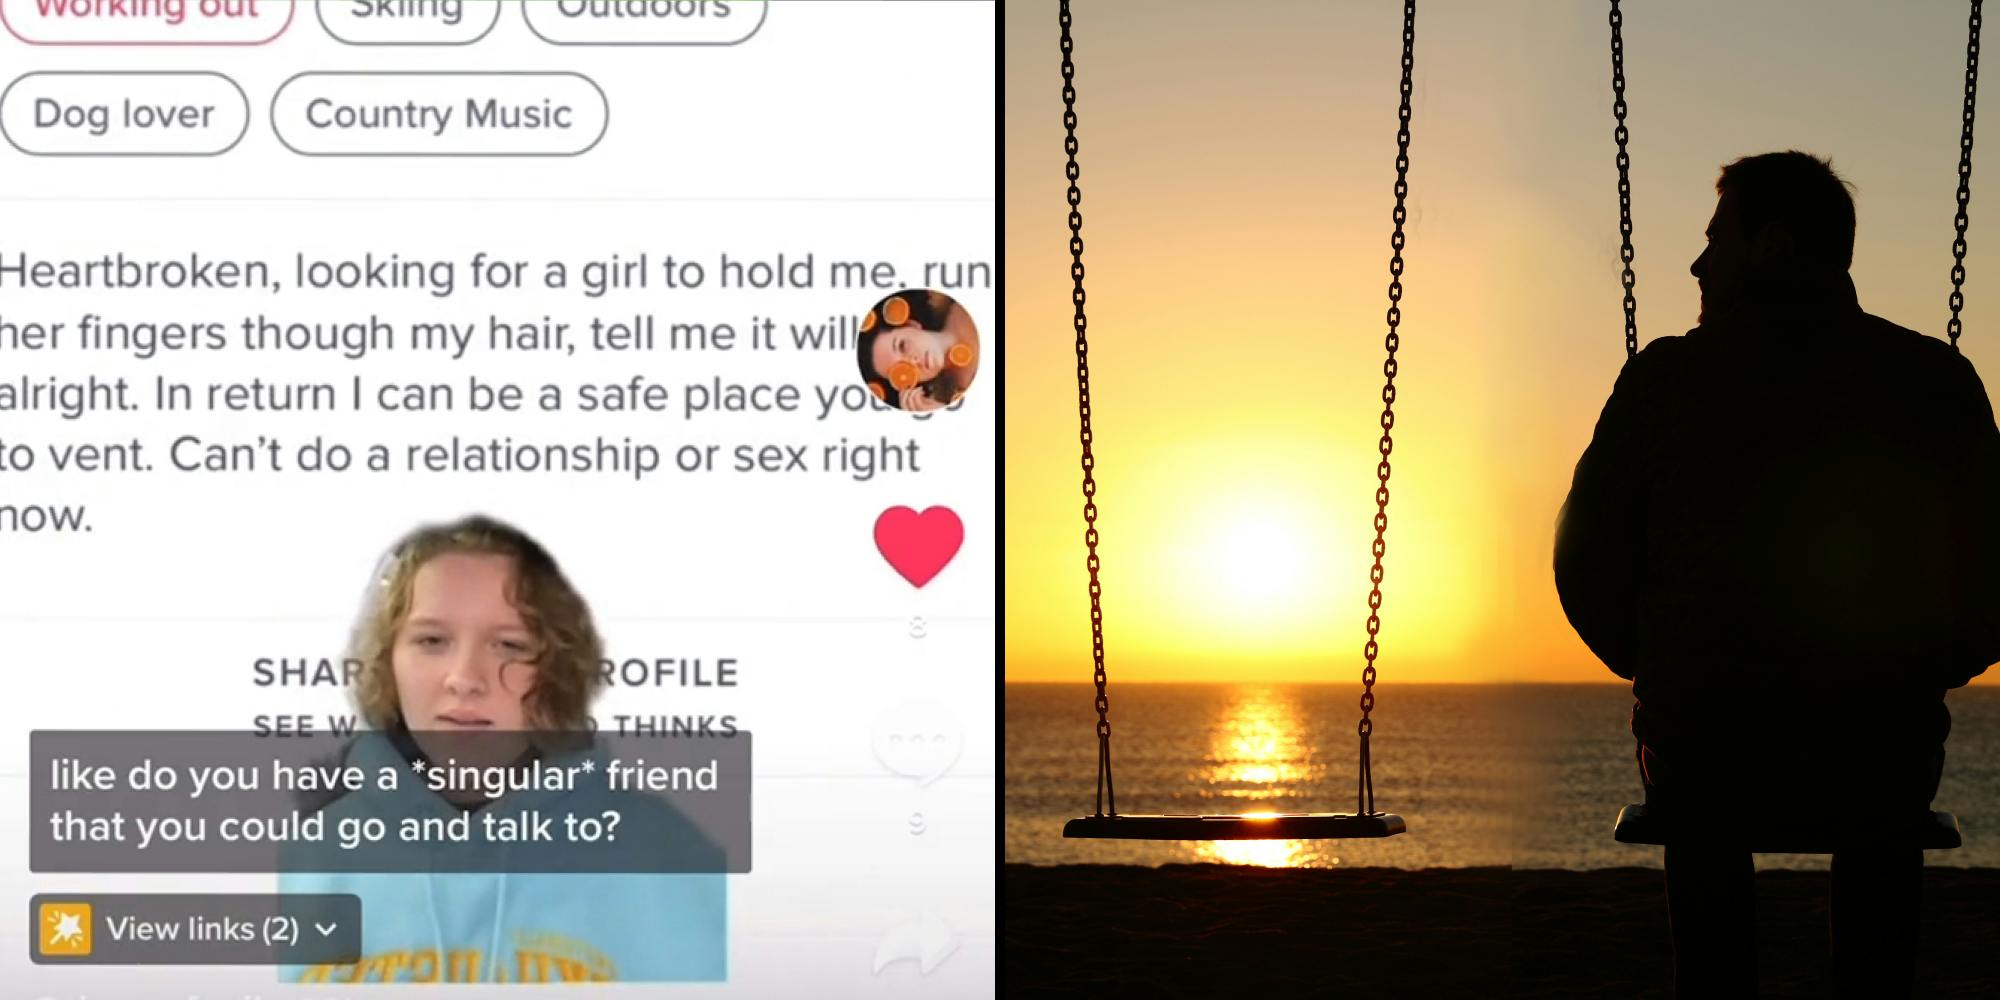 Woman greenscreen tiktok hinge profile bio "Heartbroken, looking for a girl to hold me, run her fingers through my hair, tell me it will be alright. In return I can be a safe place you go vent to. Can't do a relationship or sex right now" caption "like do you have a singular friend that you could go and talk to?" (l) Man on swing alone staring at empty swing at sunset near water (r)